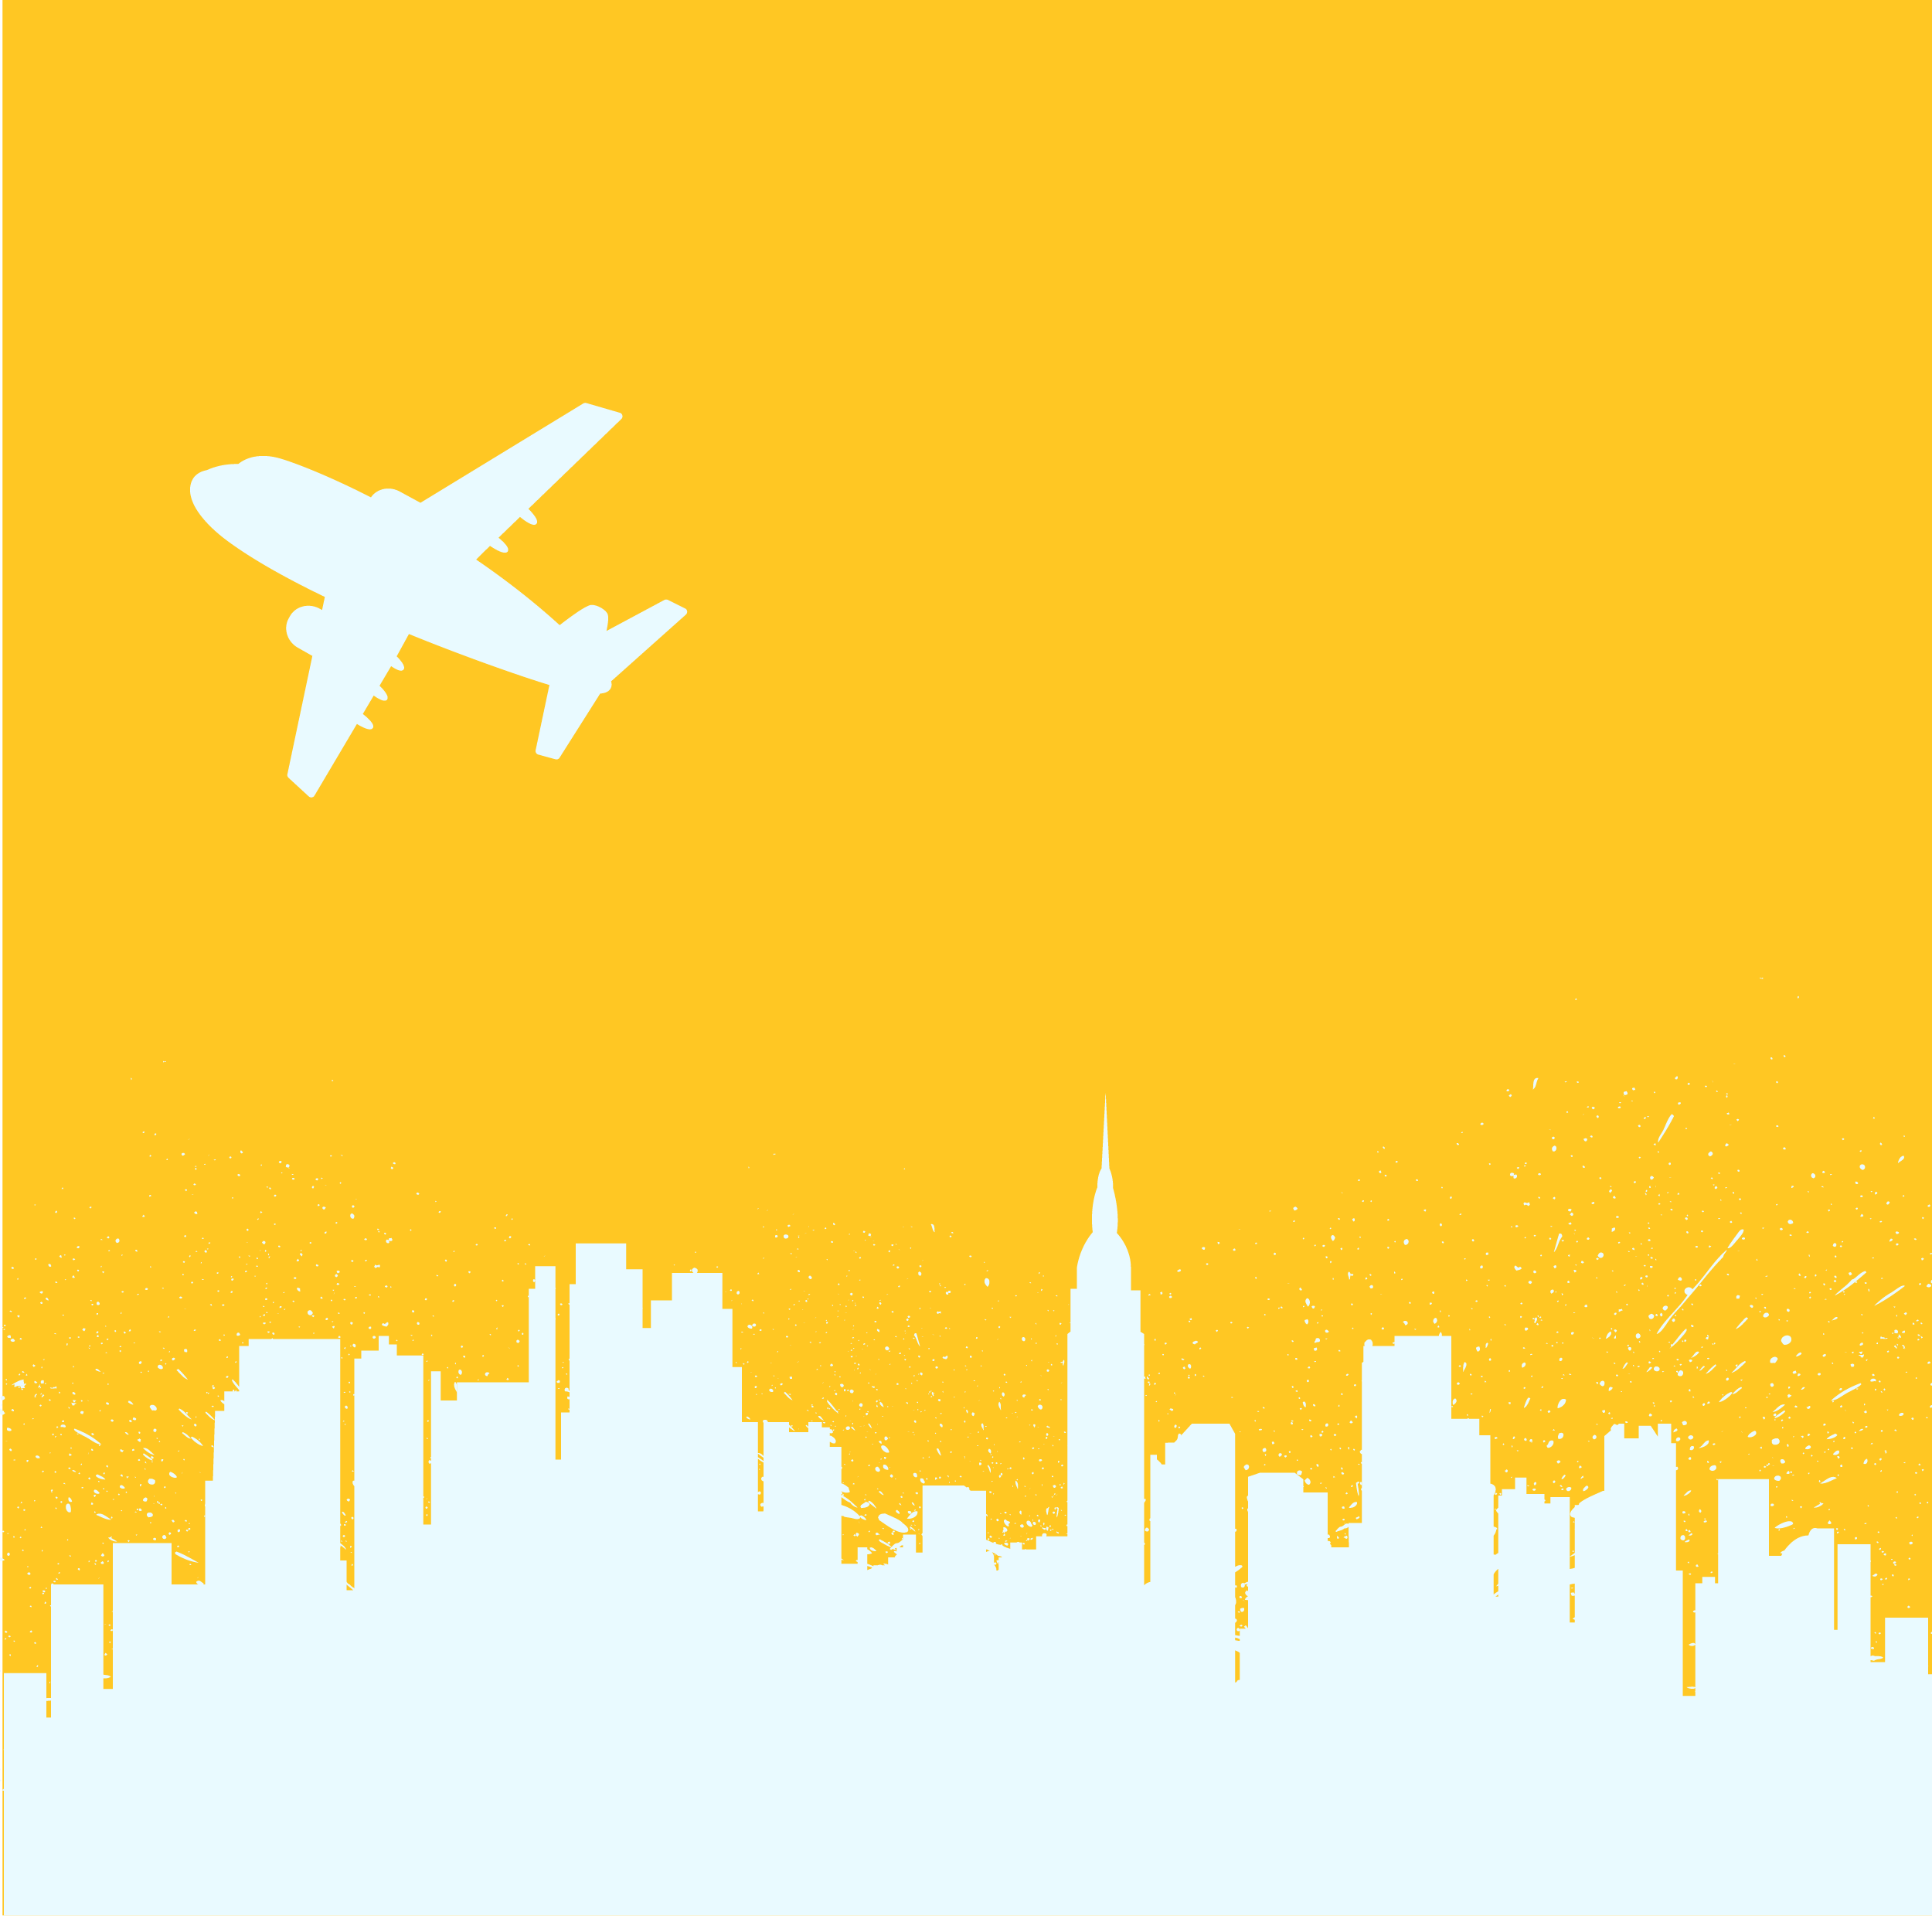 Plane Silhouette Skylines Silhouette Shapes on Yellow Background PNG Clipart